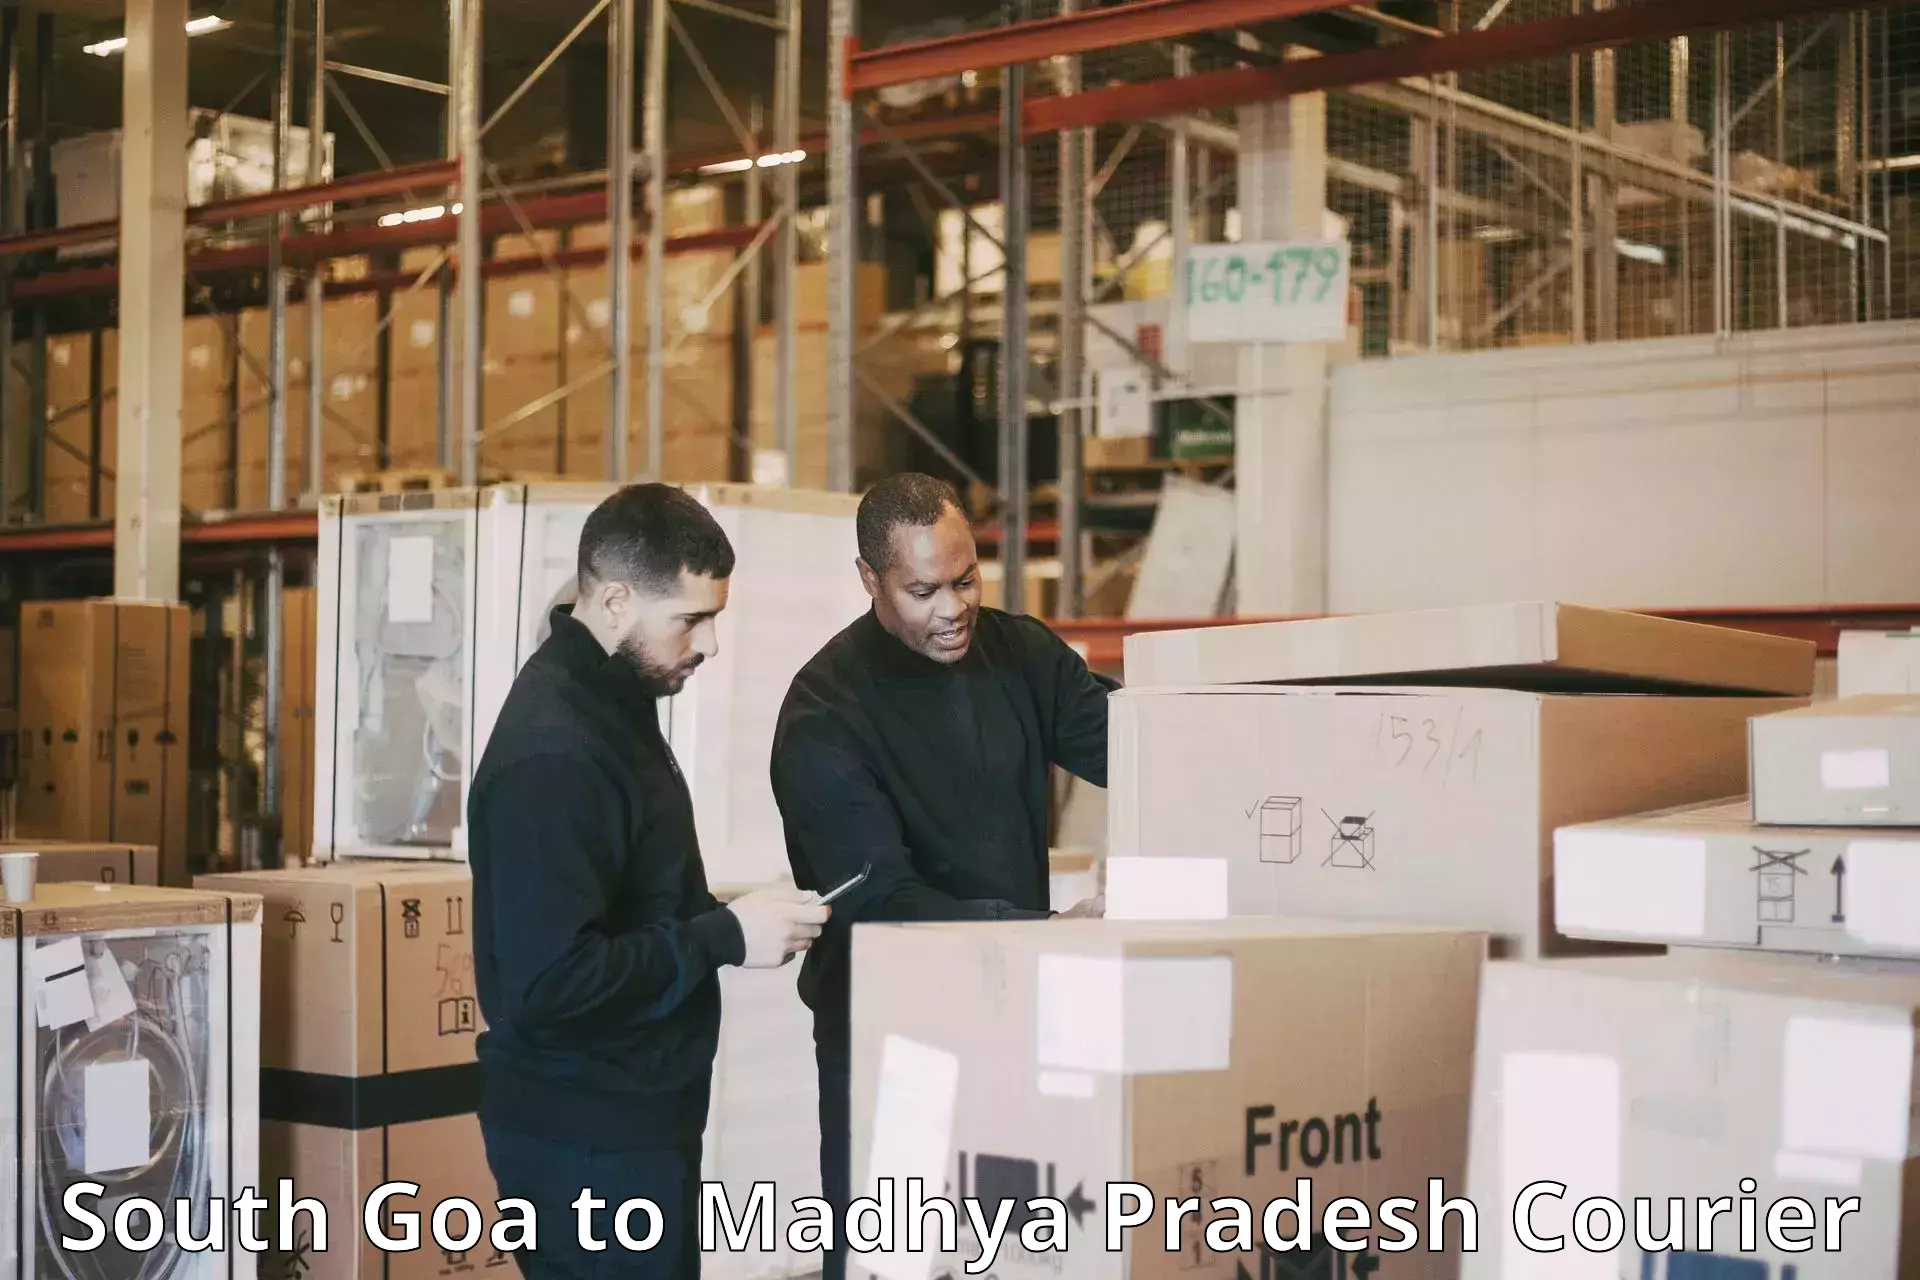 Professional courier handling South Goa to Dewas